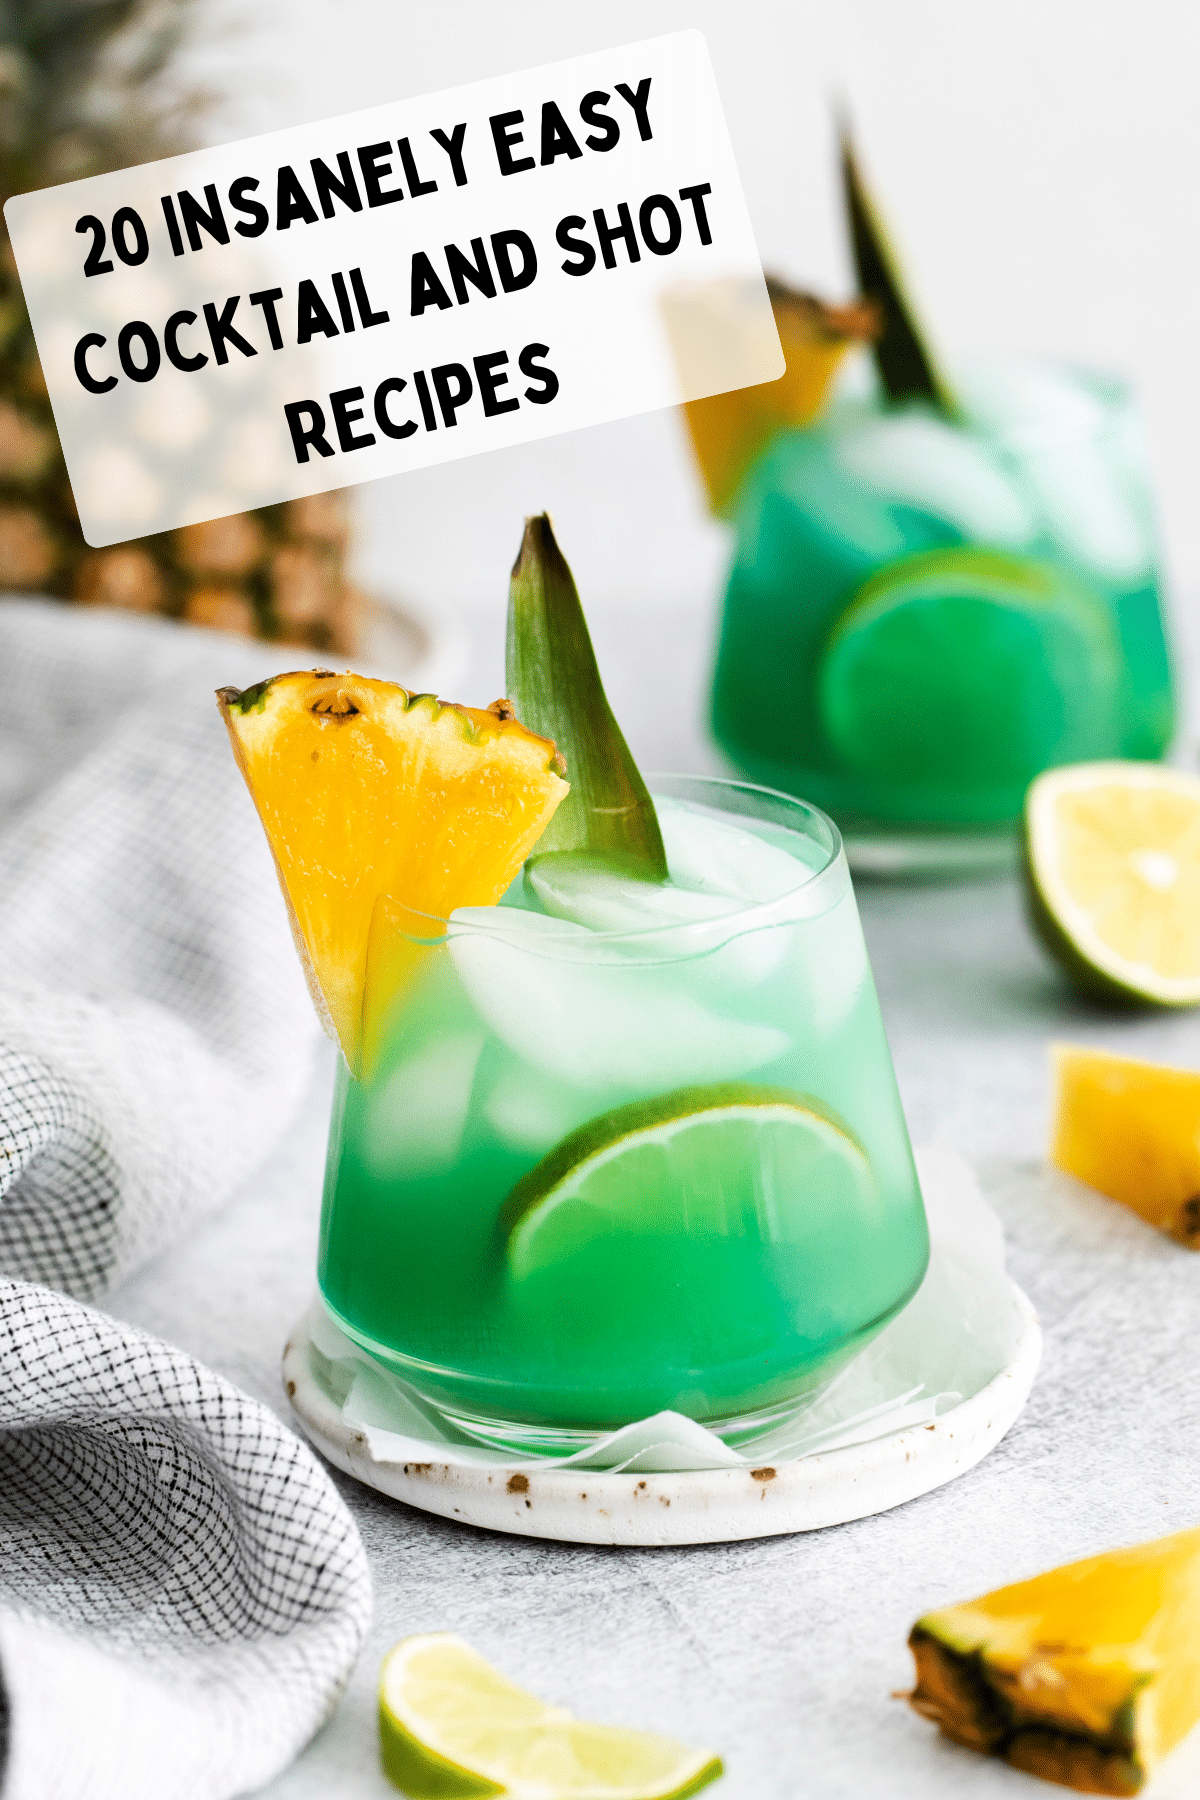 text overlay: 20 insanely easy cocktail recipes. A clear glass with ice cubes and green/blue liquid inside. A pineapple chunk on top left of class and limes around the glass on table